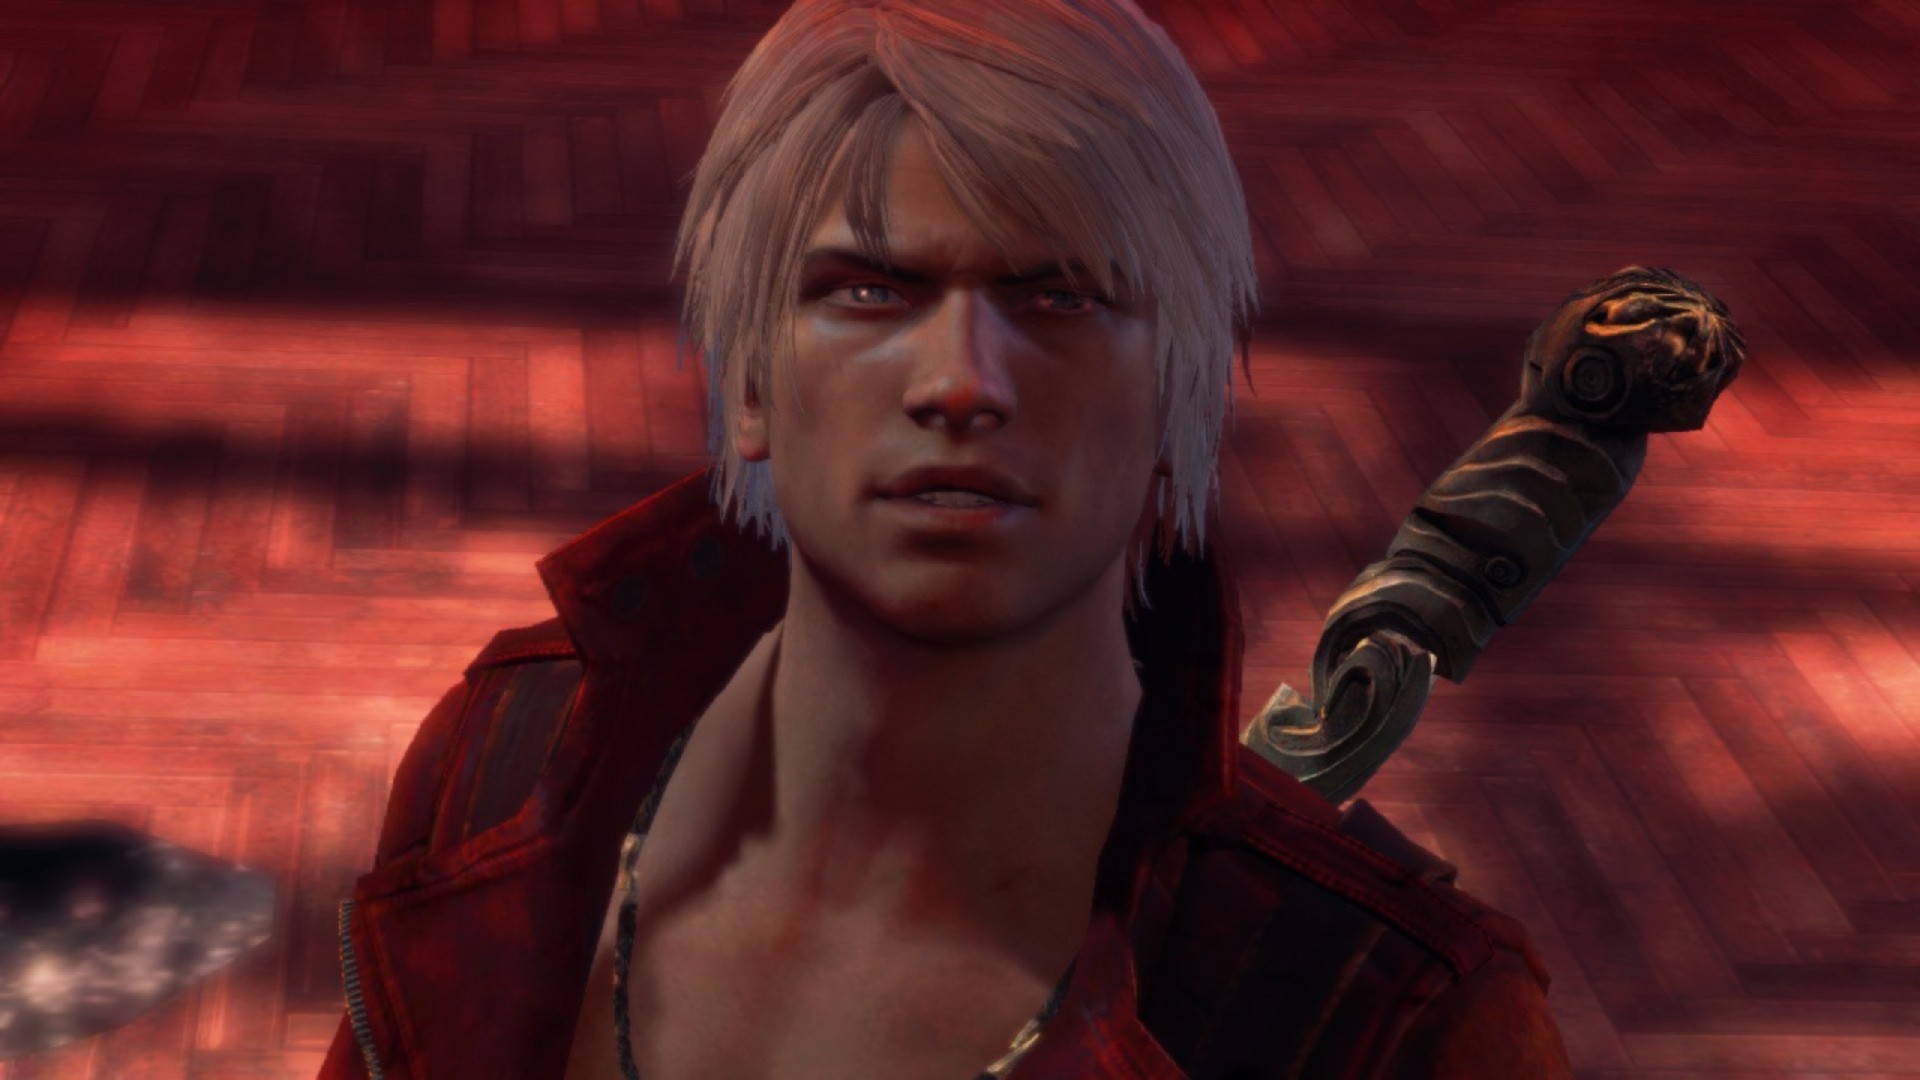 dmc devil may cry characters